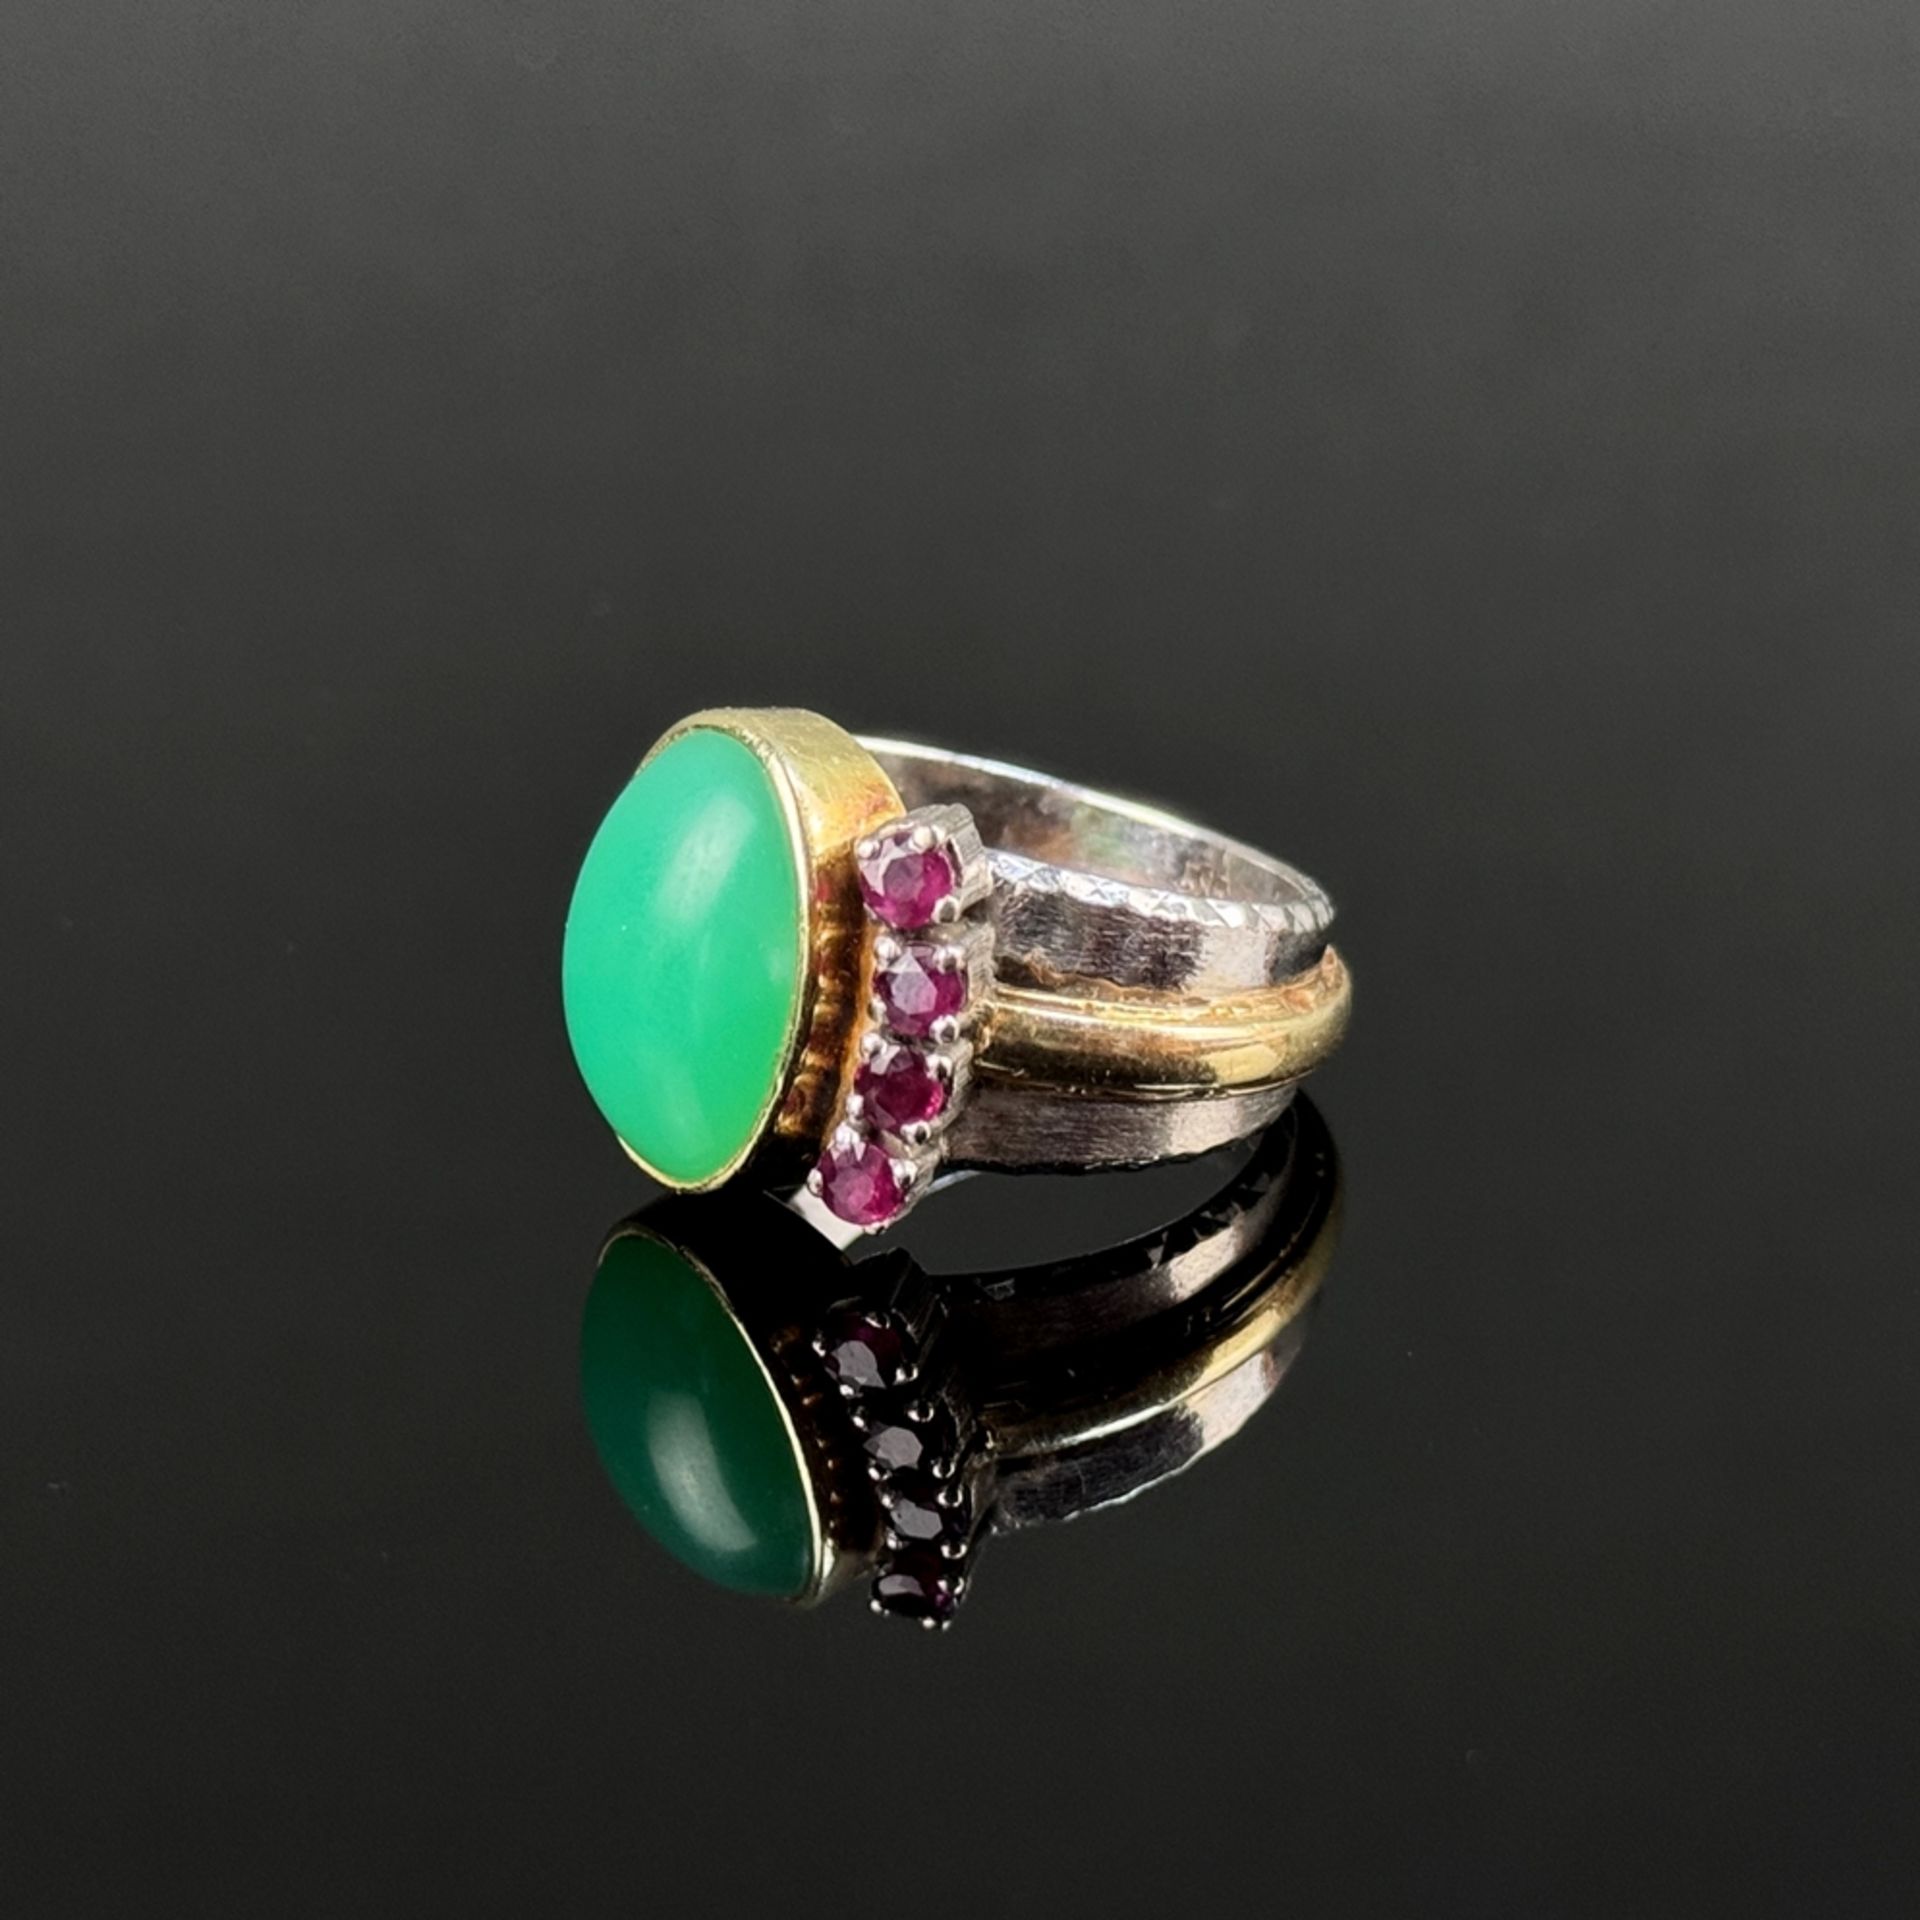 Chrysoprase ruby ring, goldsmith's work, 585/14K white and yellow gold (hallmarked), total weight 1